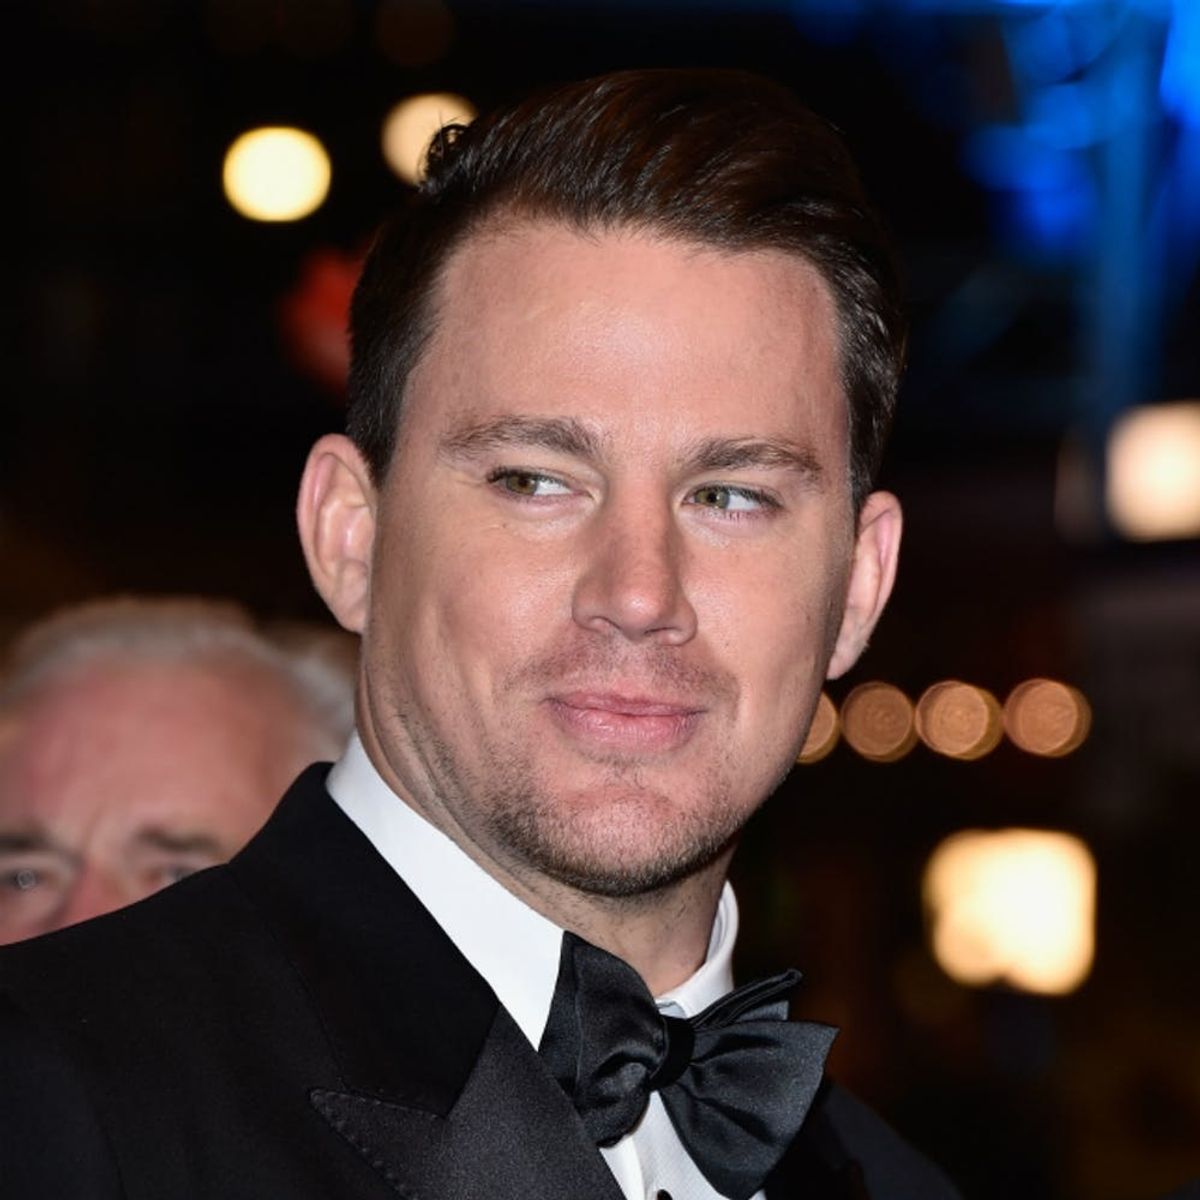 Channing Tatum’s Interview With an Autistic Host Is the Best Thing You’ll See Today